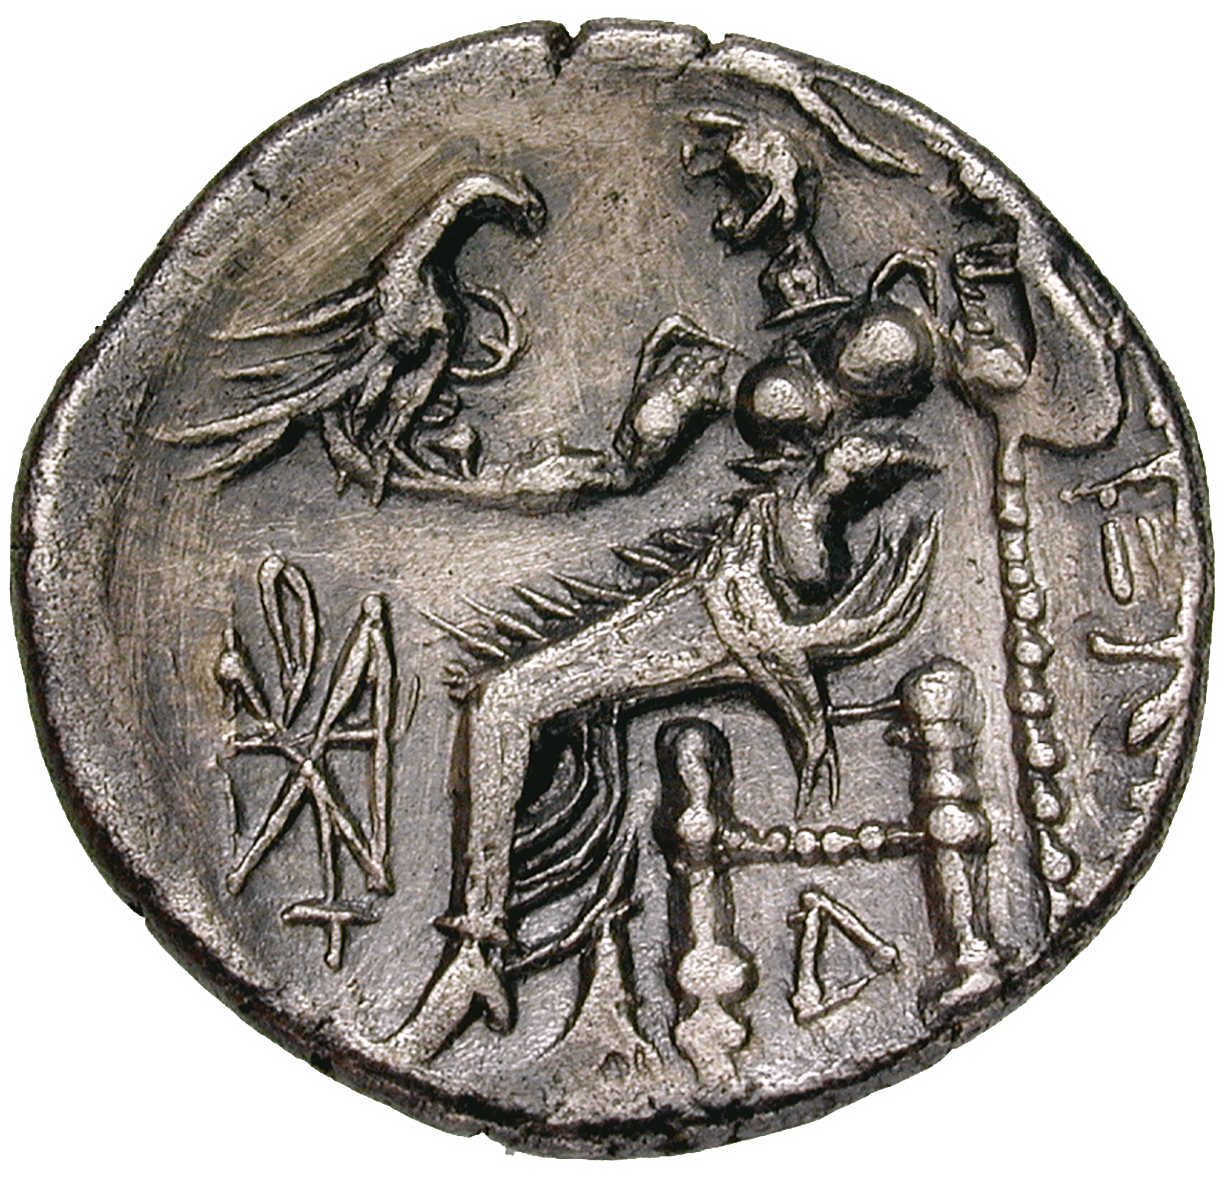 Thracia, Middle or Lower Danube Region, Drachm (reverse)